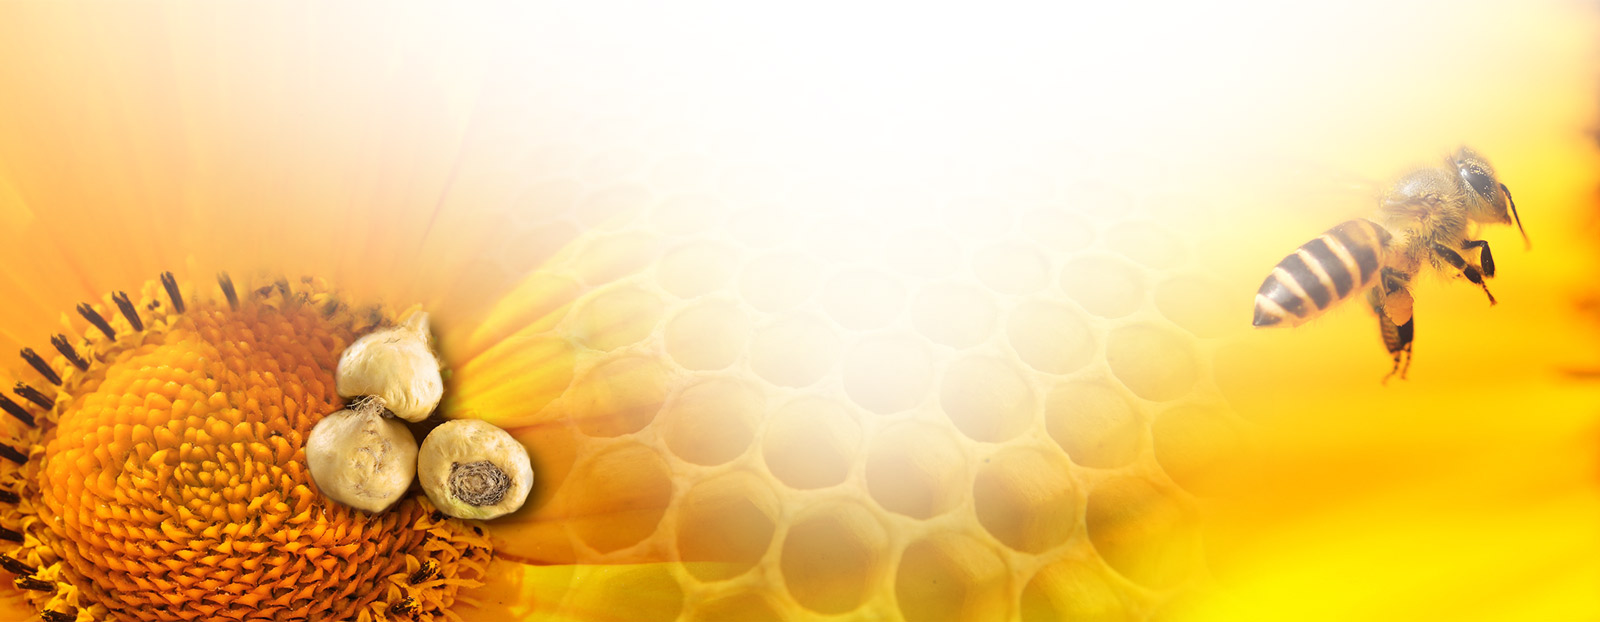 Graphic and creative design of product labels for Honey from the company Nobile Nature Products in Germany